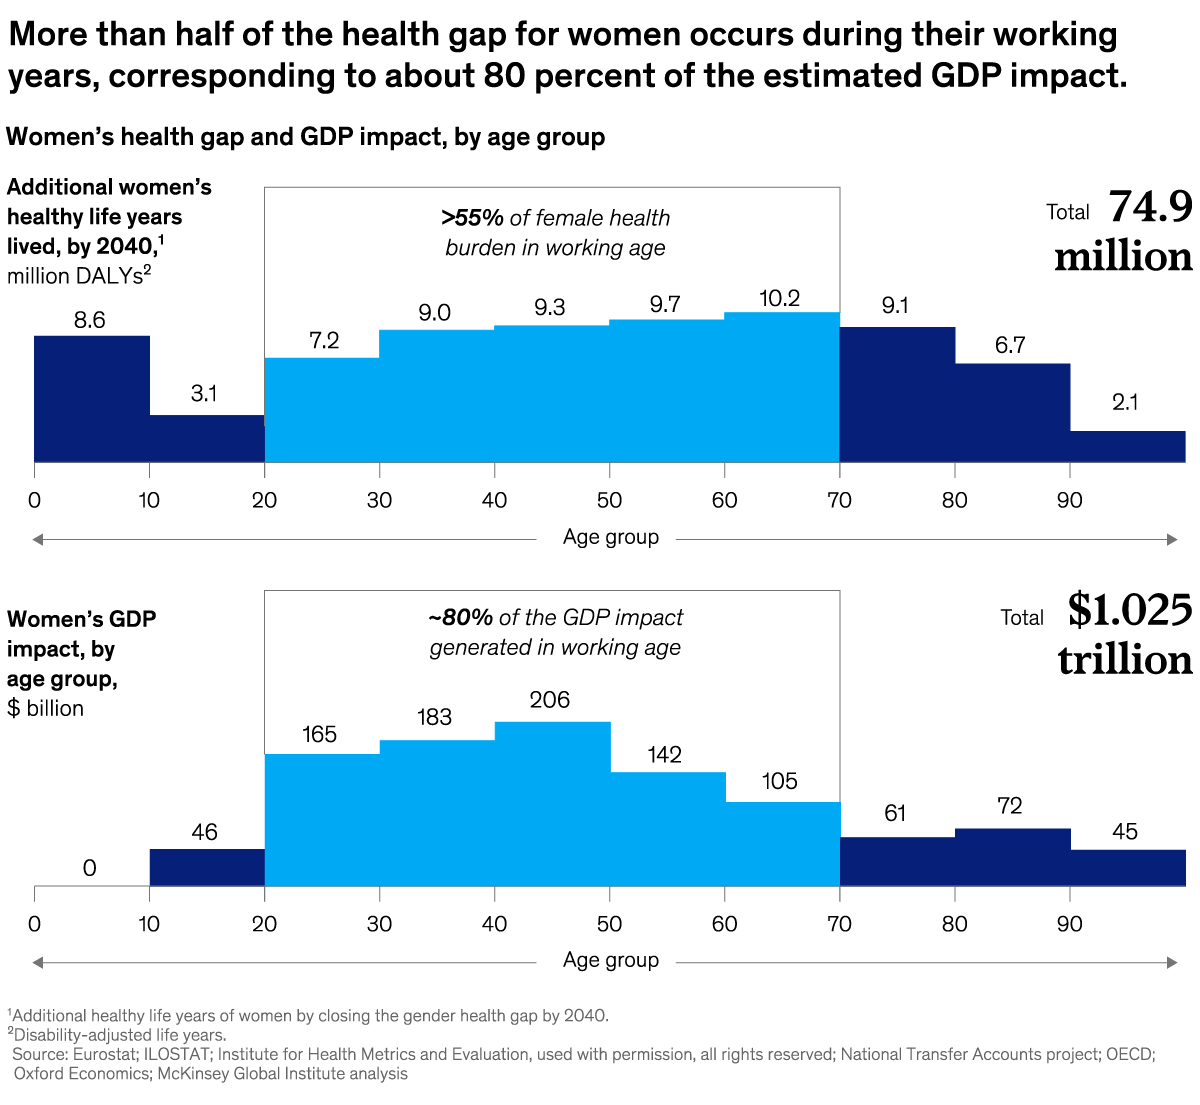 A chart titled “More than half of the health gap for women occurs during their working years, corresponding to about 80 percent of the estimated GDP impact.” Click to open the full article on McKinsey.com.